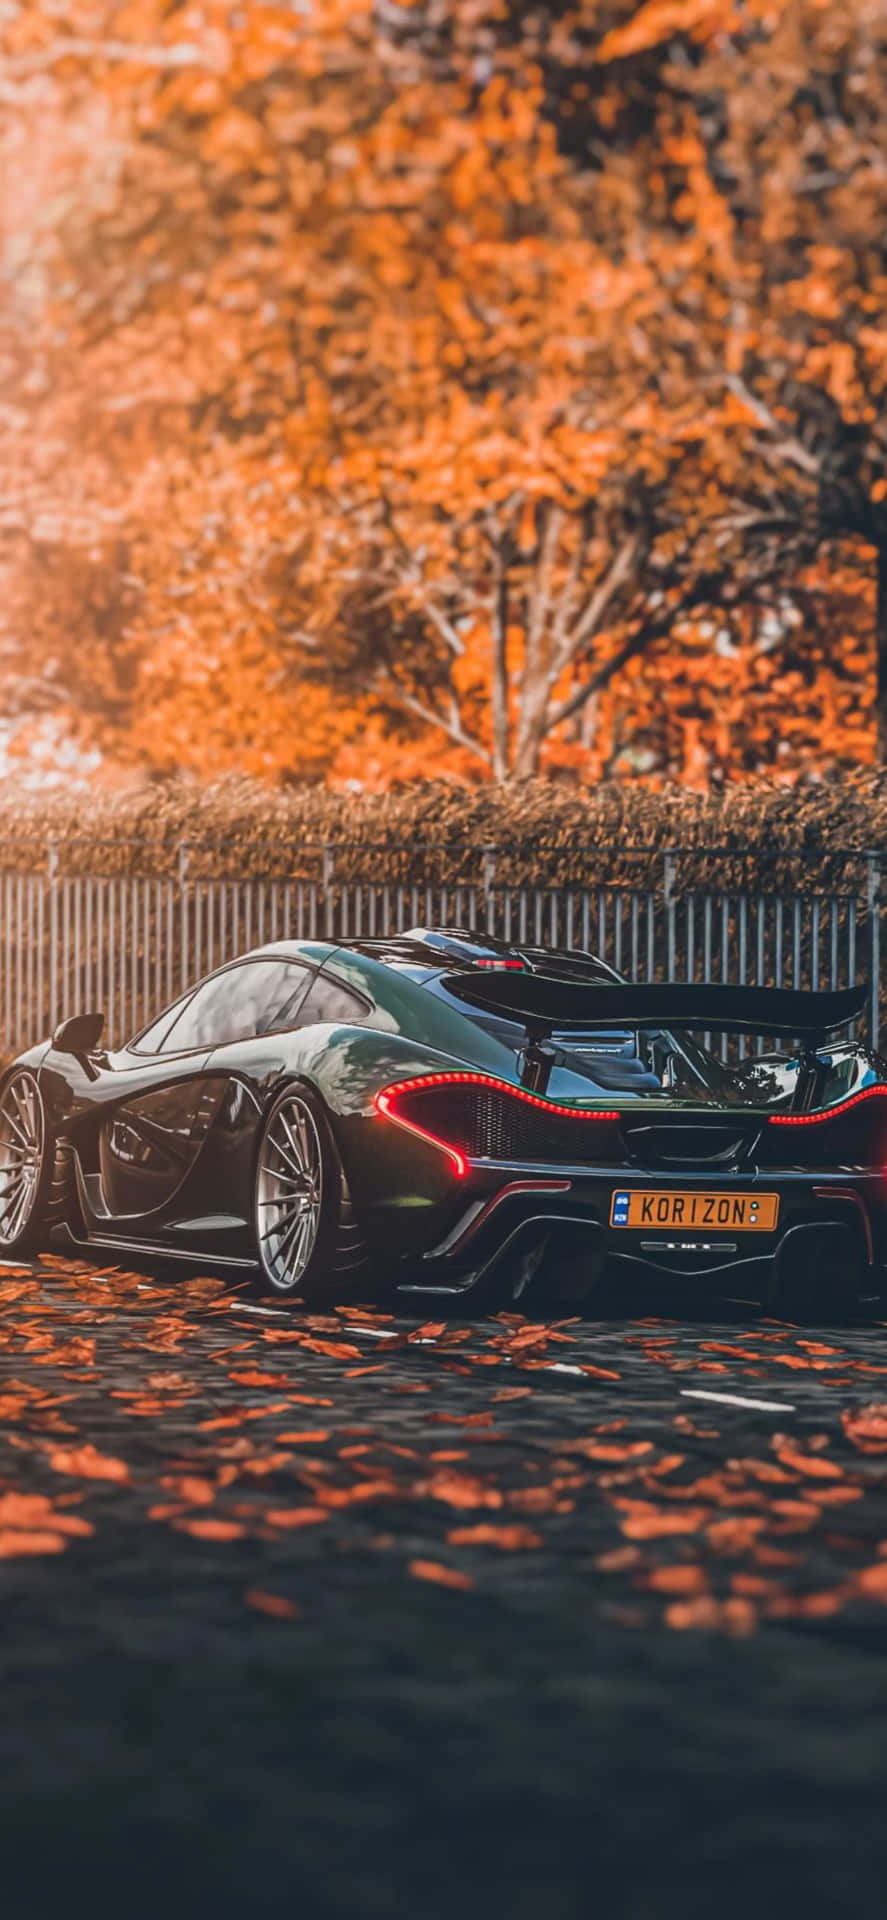 The ultimate combination of style and power - The Iphone Xs Max and Mclaren 720s